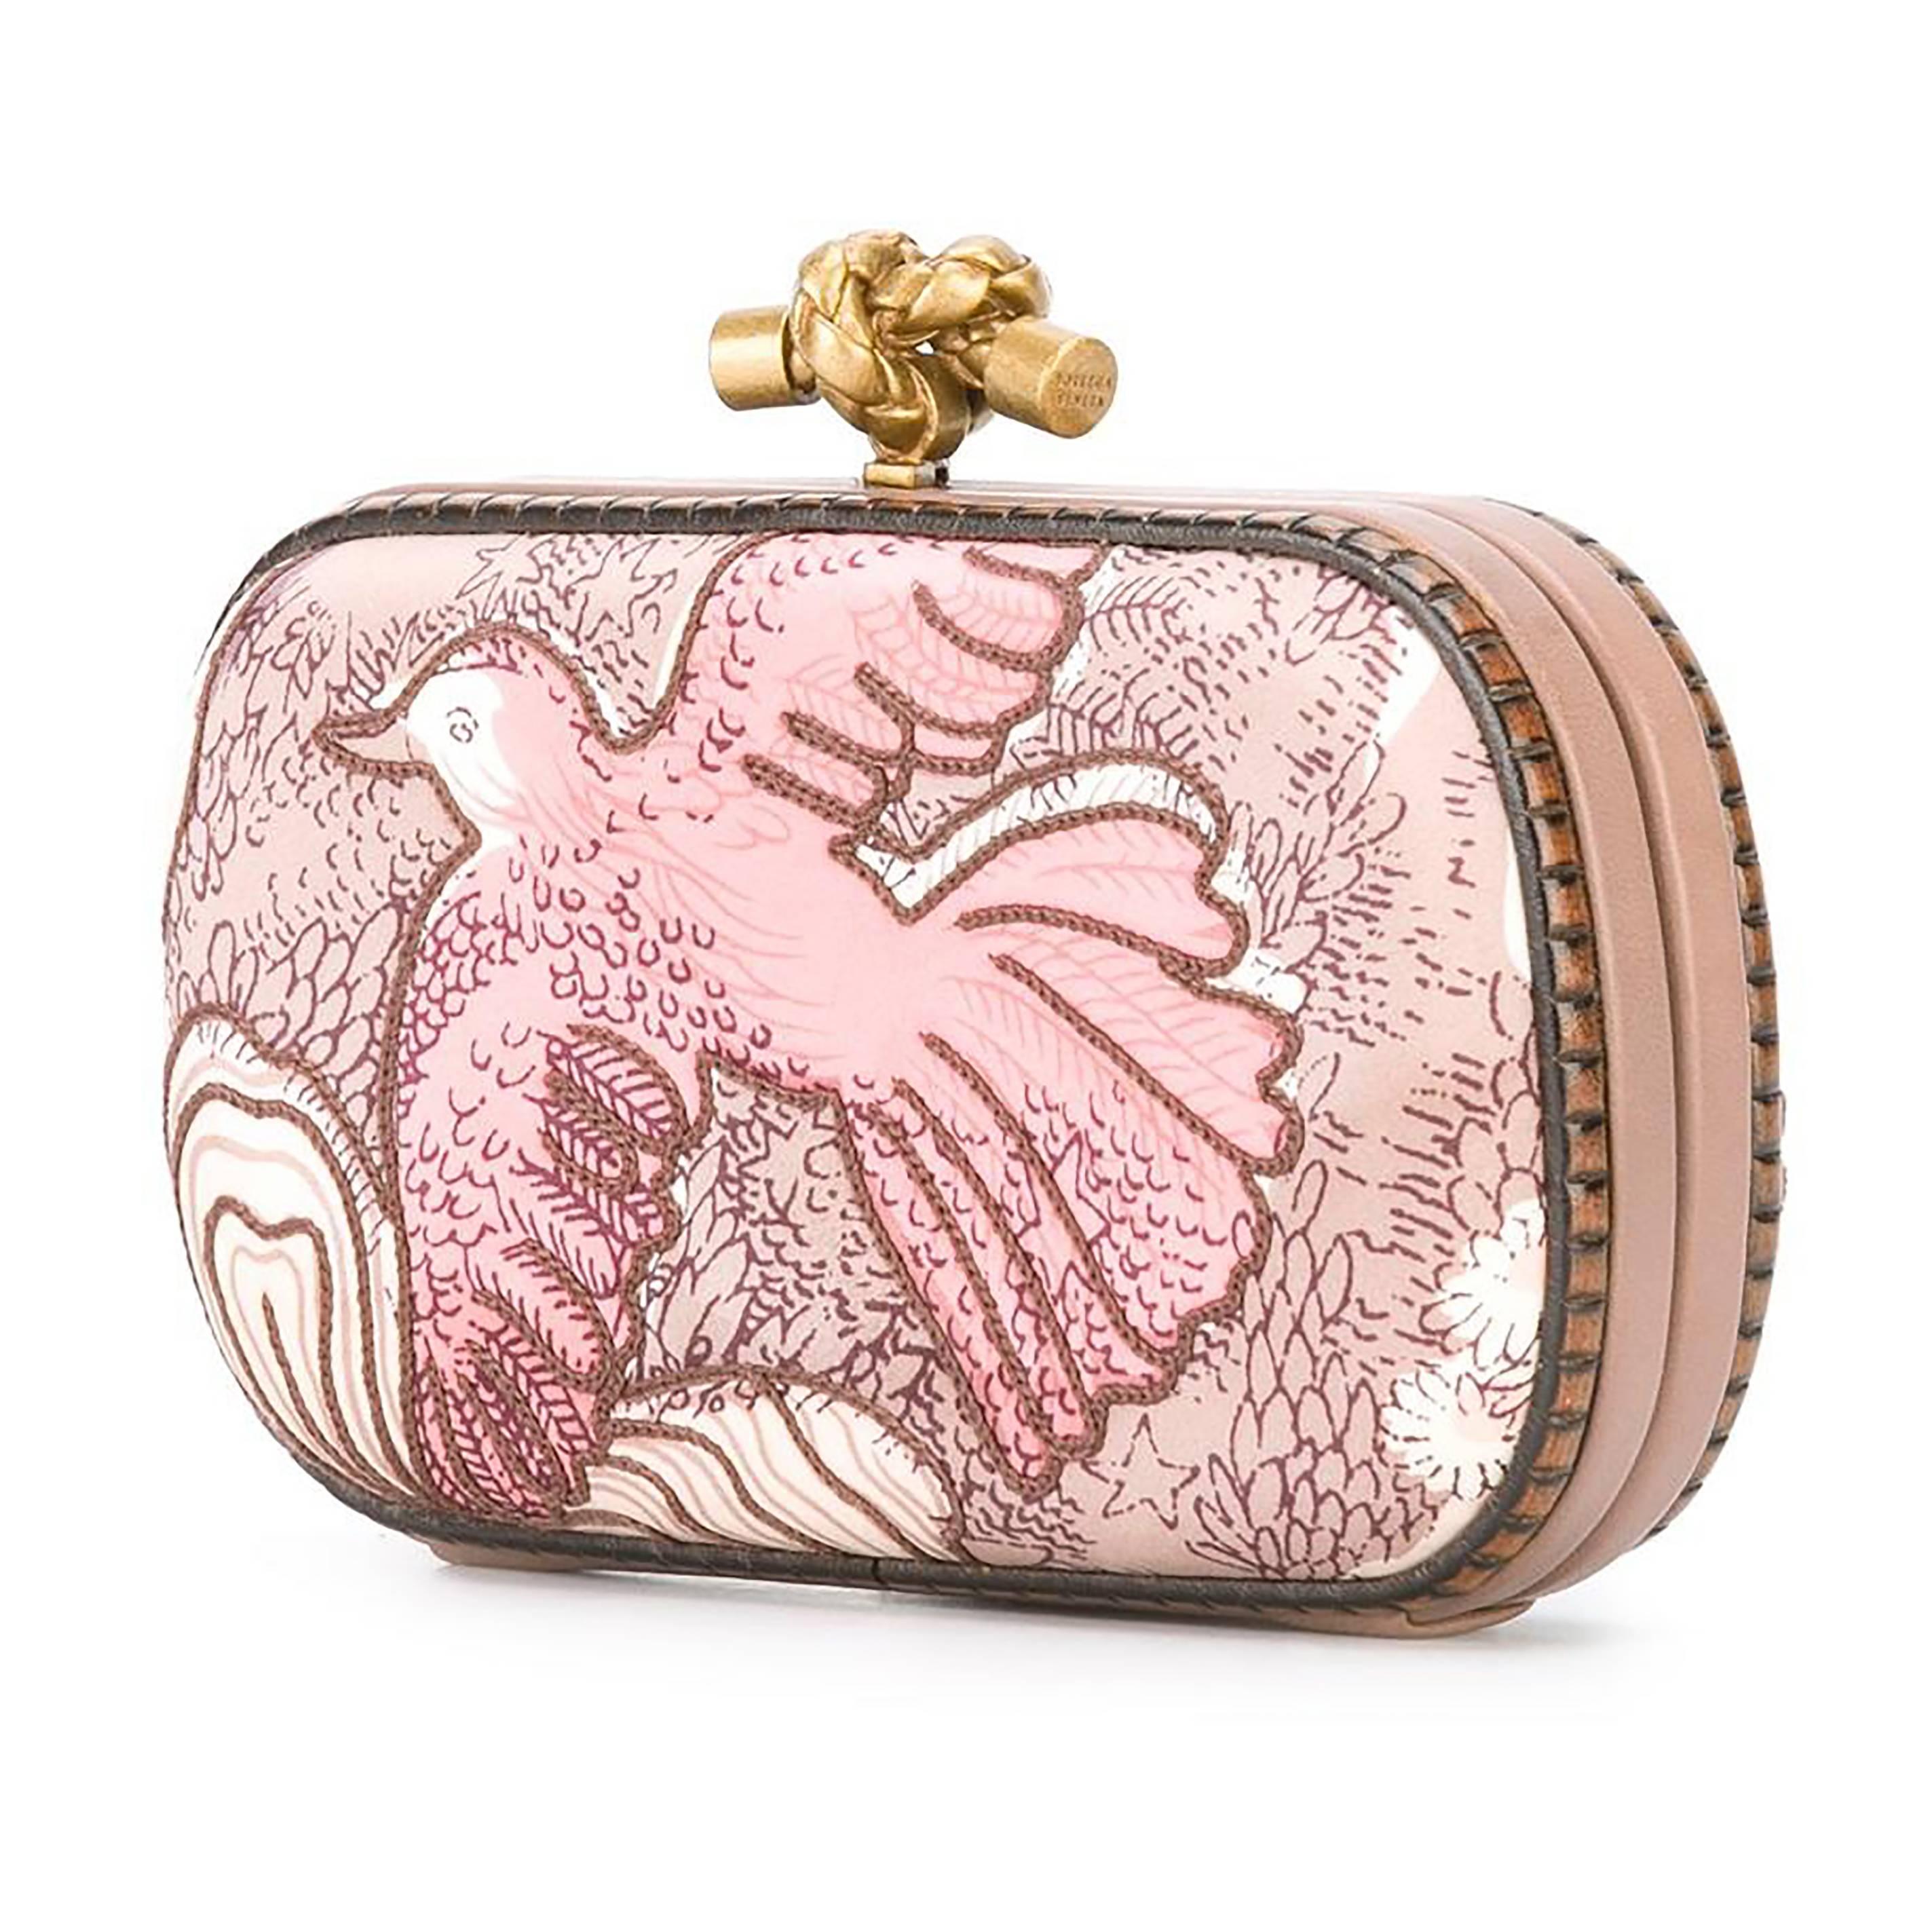 A romantic reimagining of Bottega Veneta's iconic Knot clutch. The facade hard-case bag is adorned in an embroidered textile that is printed with an pink-toned illustration of a bird. This is off-set with the brand's knotted Intrecciato clasp in